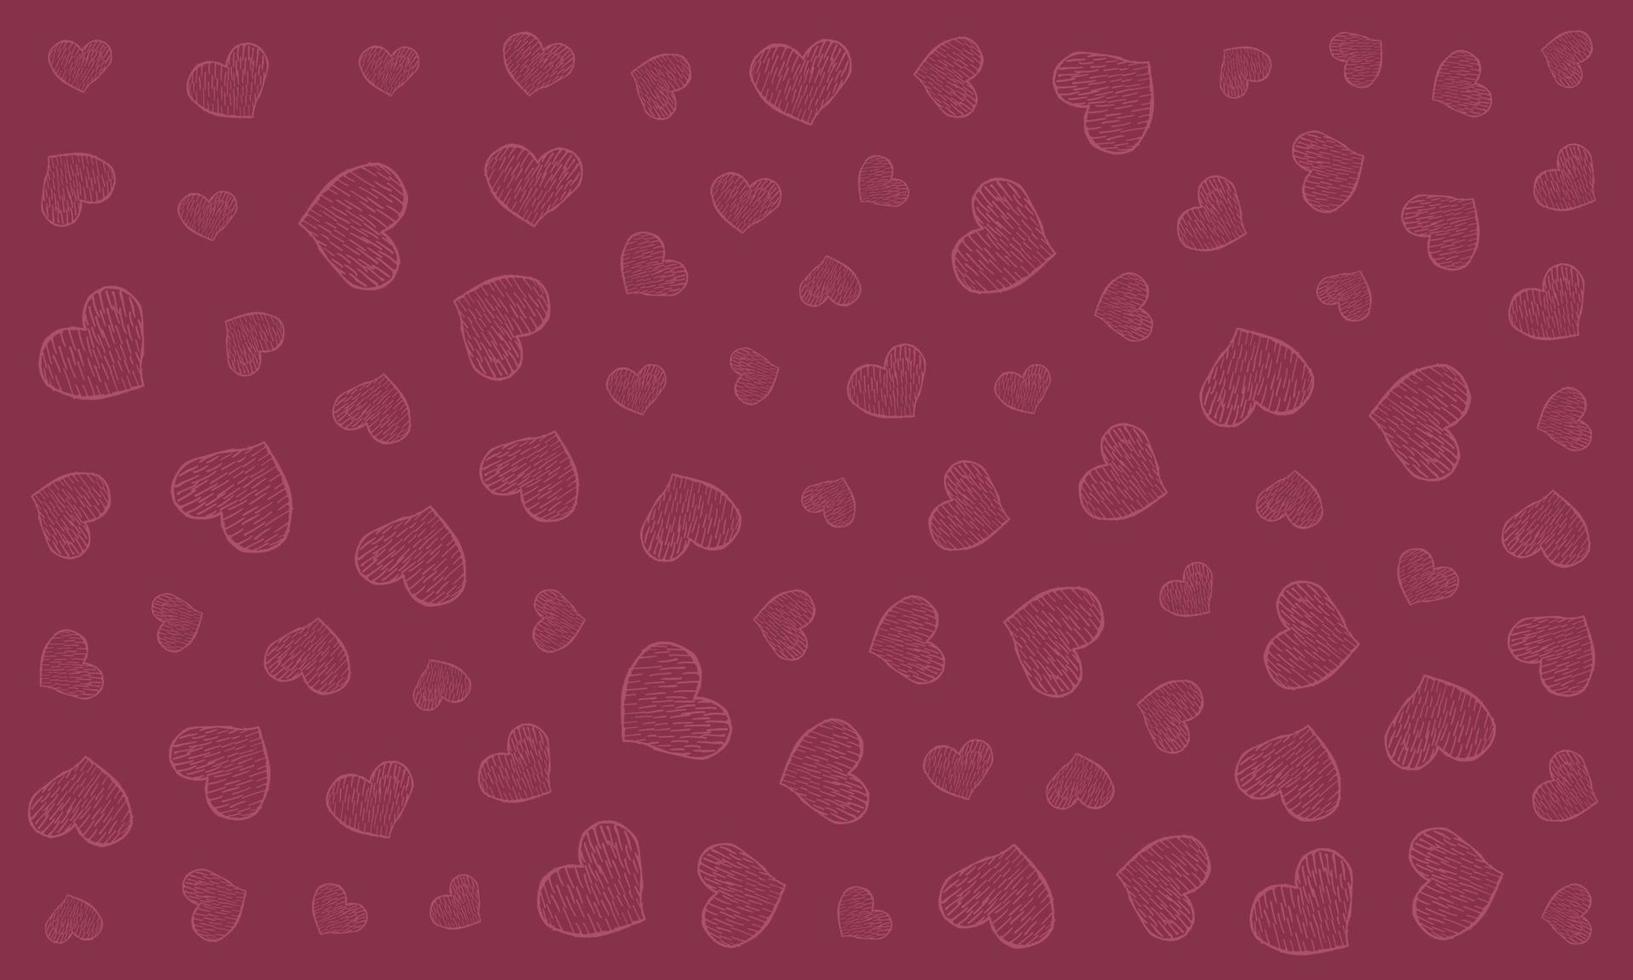 Happy Valentines Day Background. Background with doodle hearts for Valentines Day. Vector illustration.